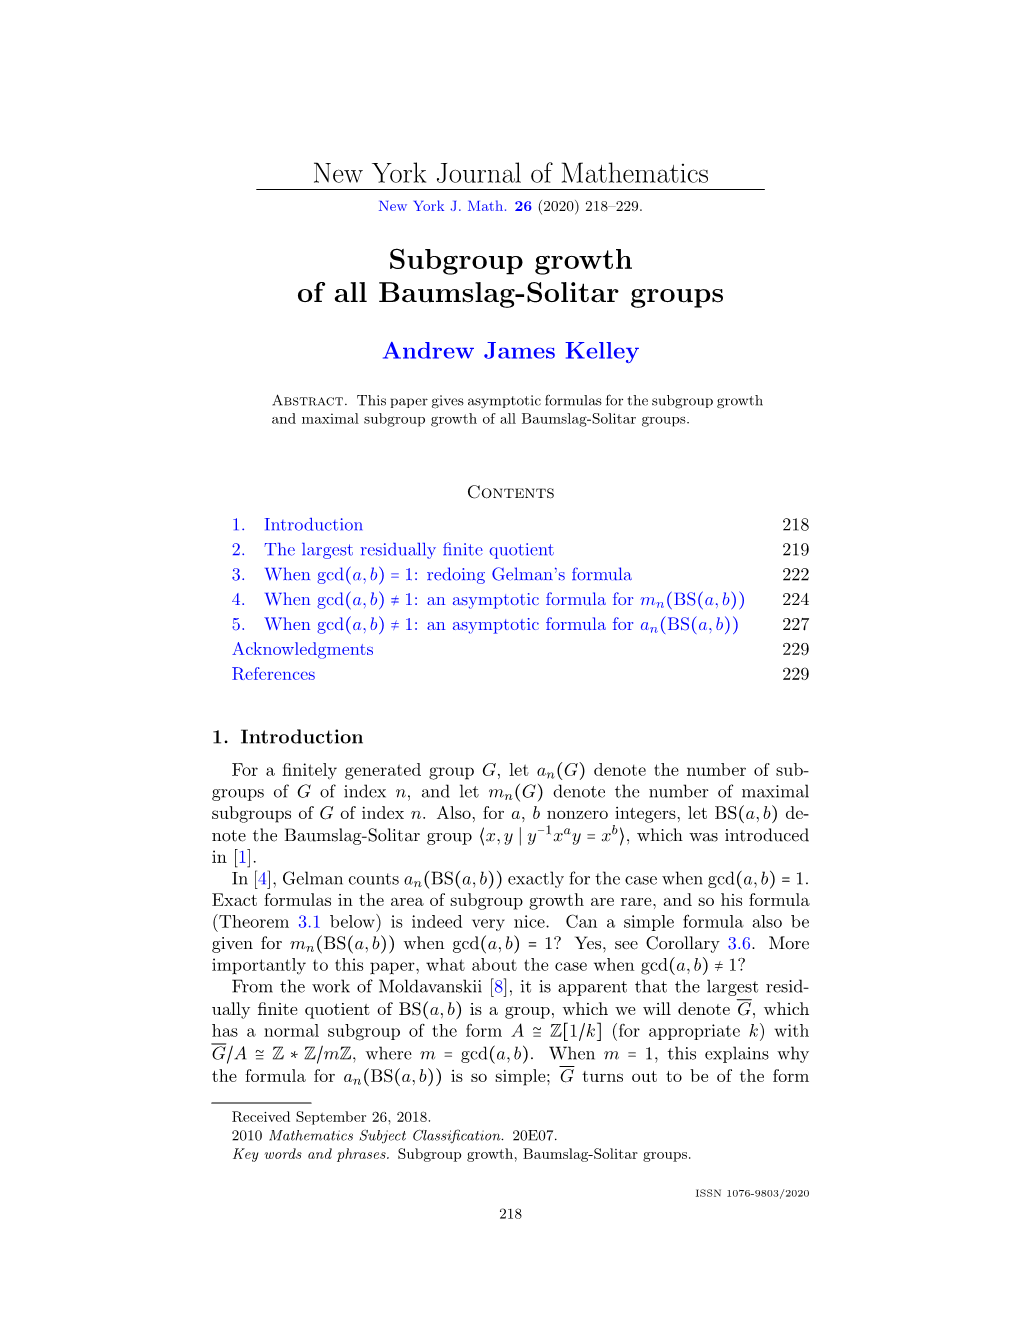 New York Journal of Mathematics Subgroup Growth of All Baumslag